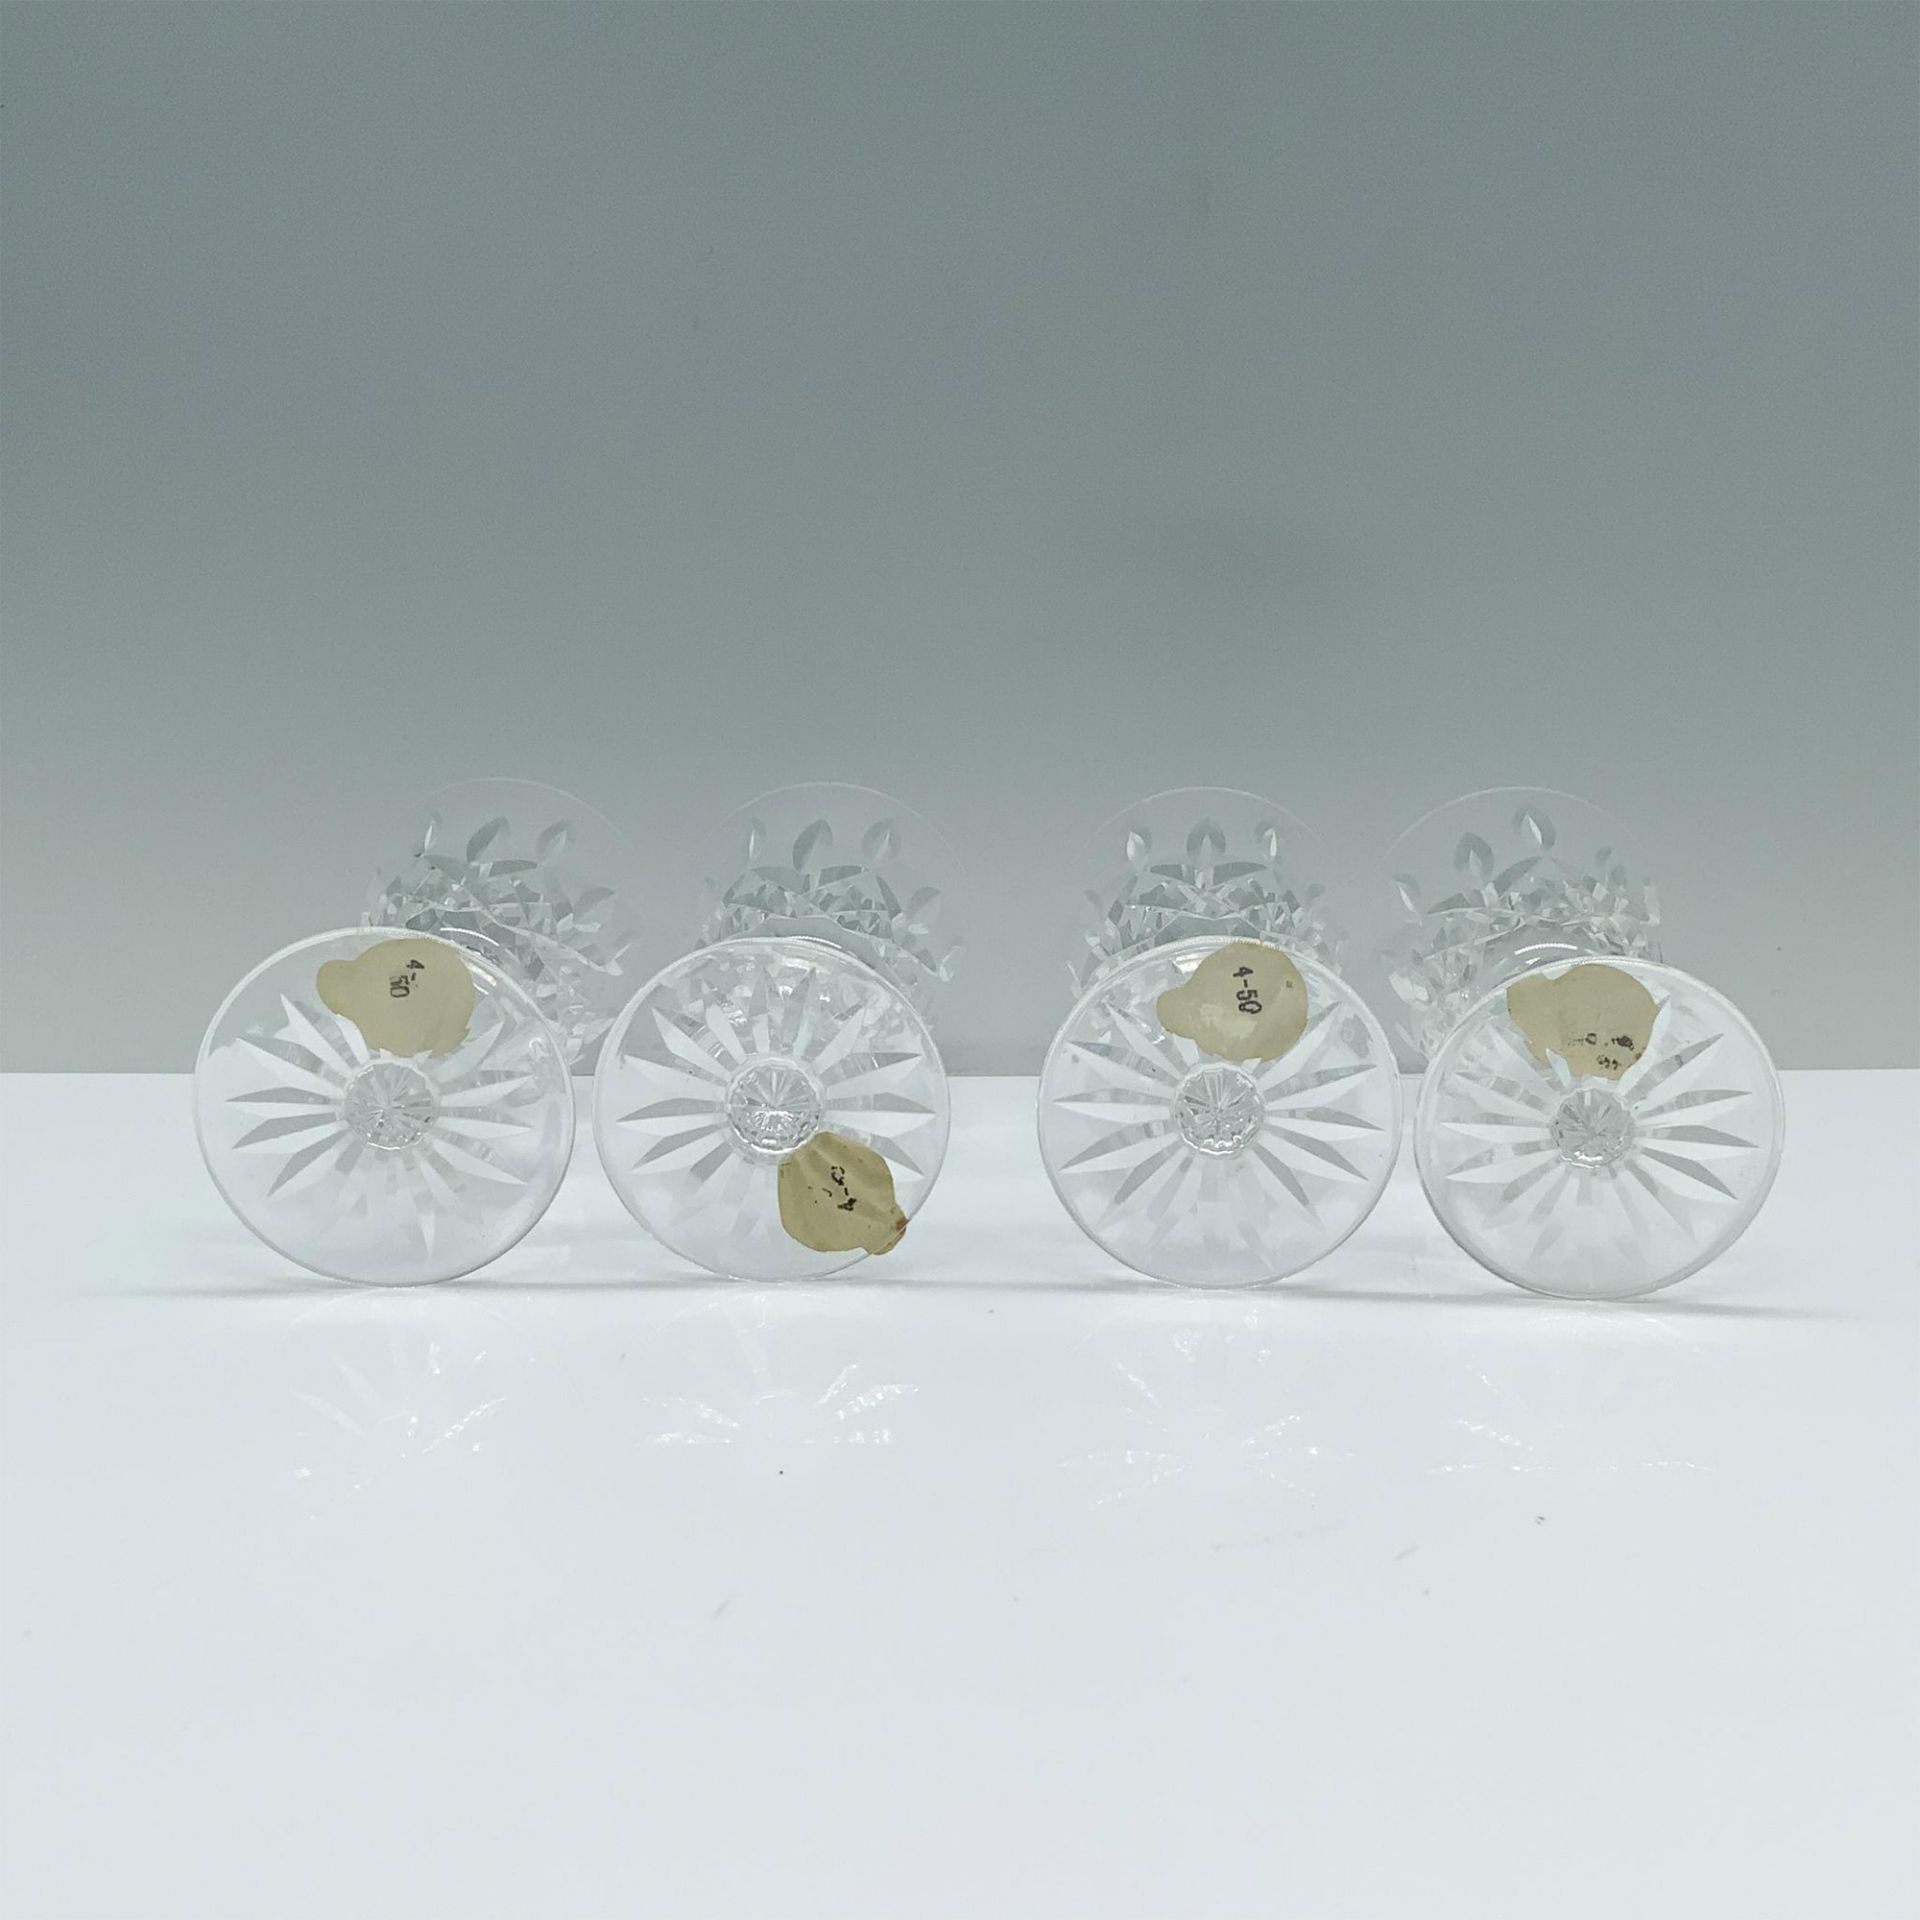 4pc Waterford Crystal Sherry Glass, Lismore - Image 3 of 4